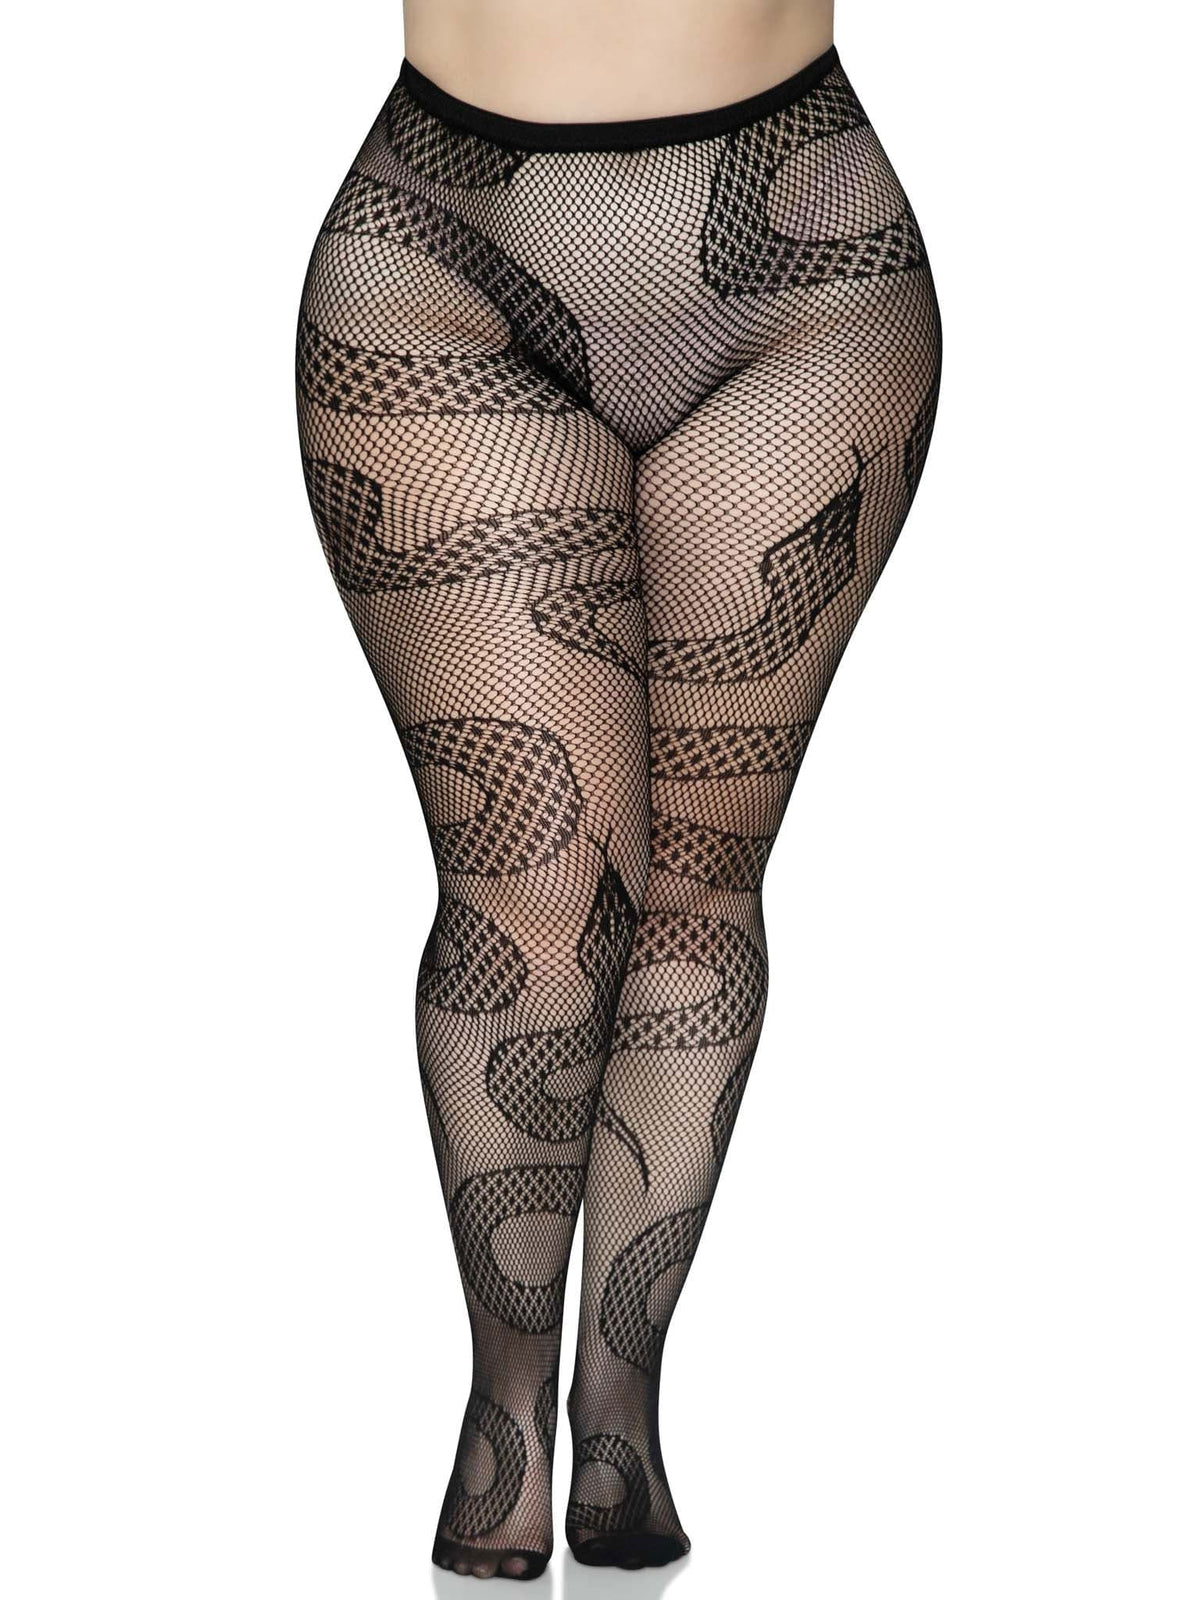 tights for girls, tights for women